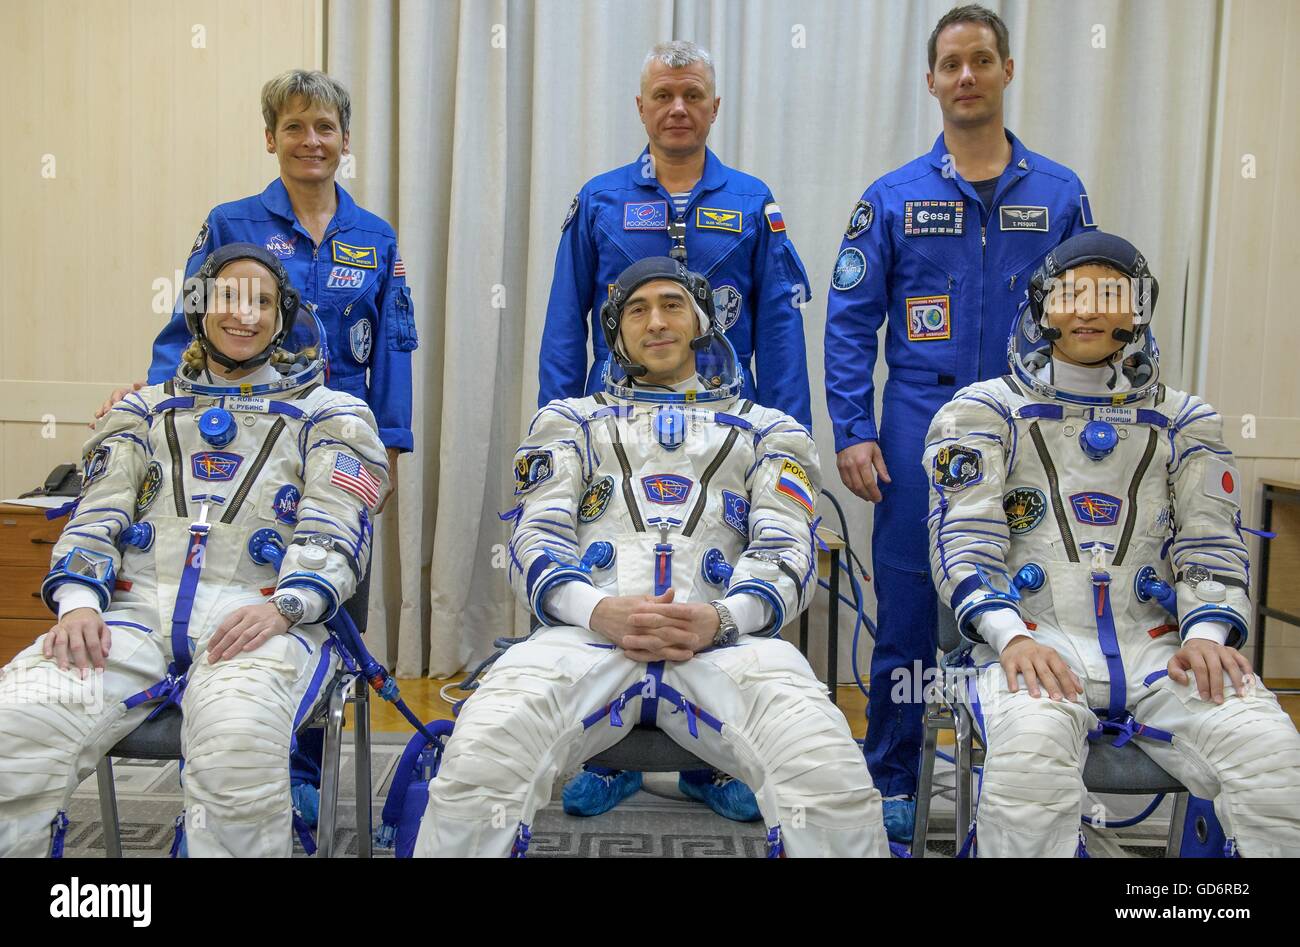 International Space Station Expedition 48 prime crew members wearing Russian Sokol launch and entry suit pose with back up crew before launch at the Baikonur Cosmodrome July 7, 2016 in Kazakhstan. Seated: American astronaut Kate Rubens, Russian cosmonaut Anatoly Ivanishin and Japanese astronaut Takuya Onishi. Standing: American astronaut Peggy Whitson, Russian cosmonaut Oleg Novitskiy, and French astronaut Thomas Pesquet. Stock Photo